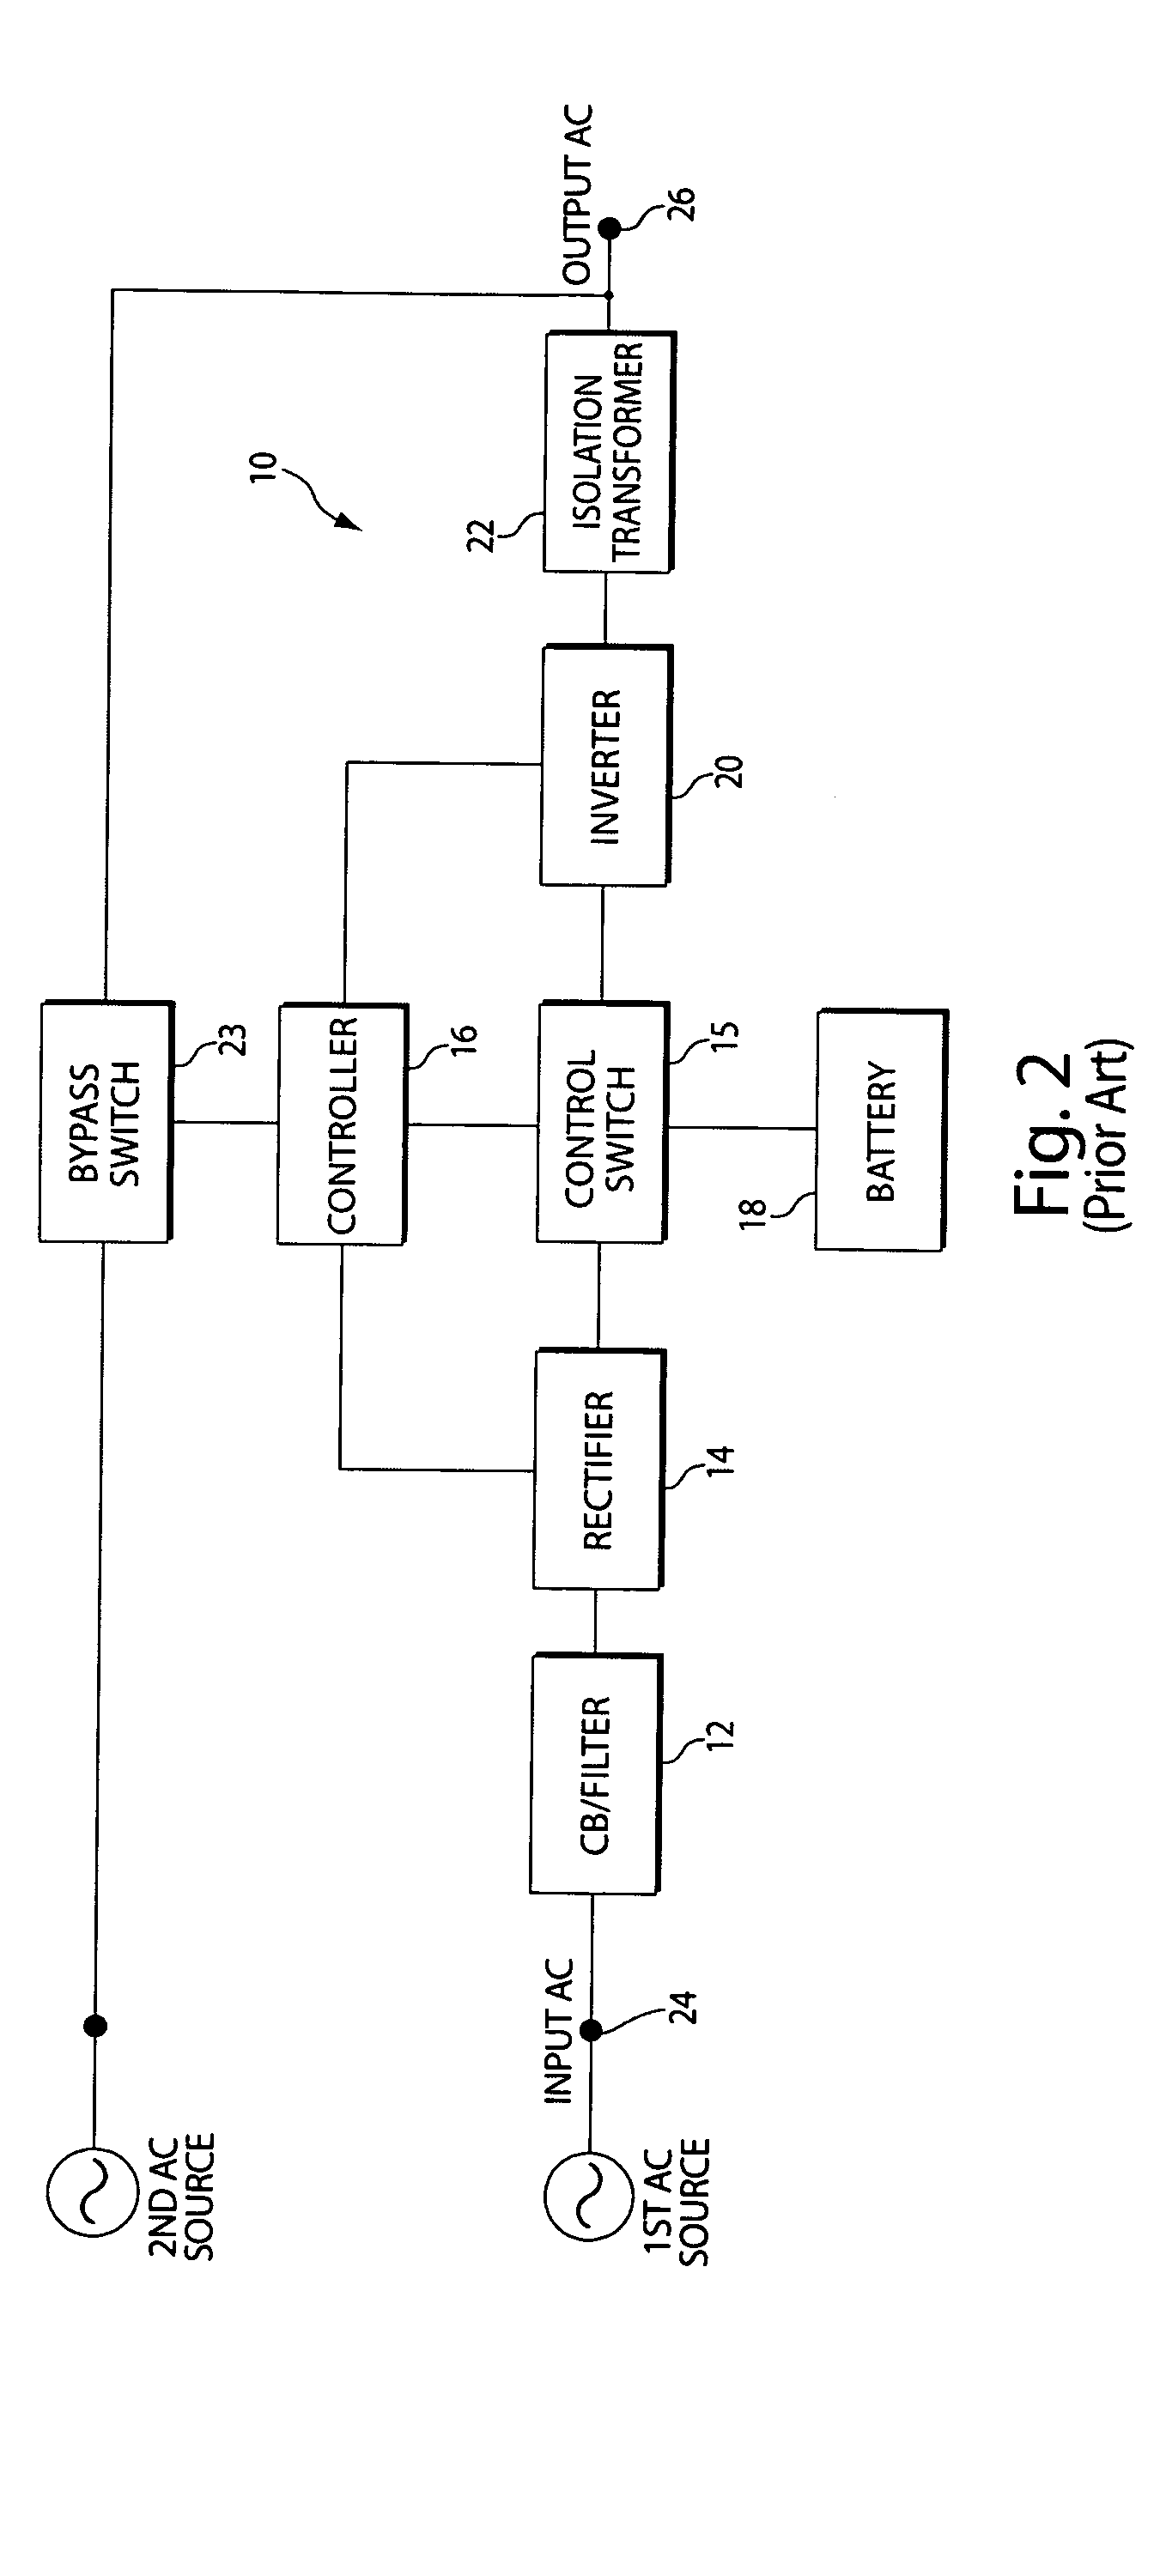 Uninterruptible power supply system and method